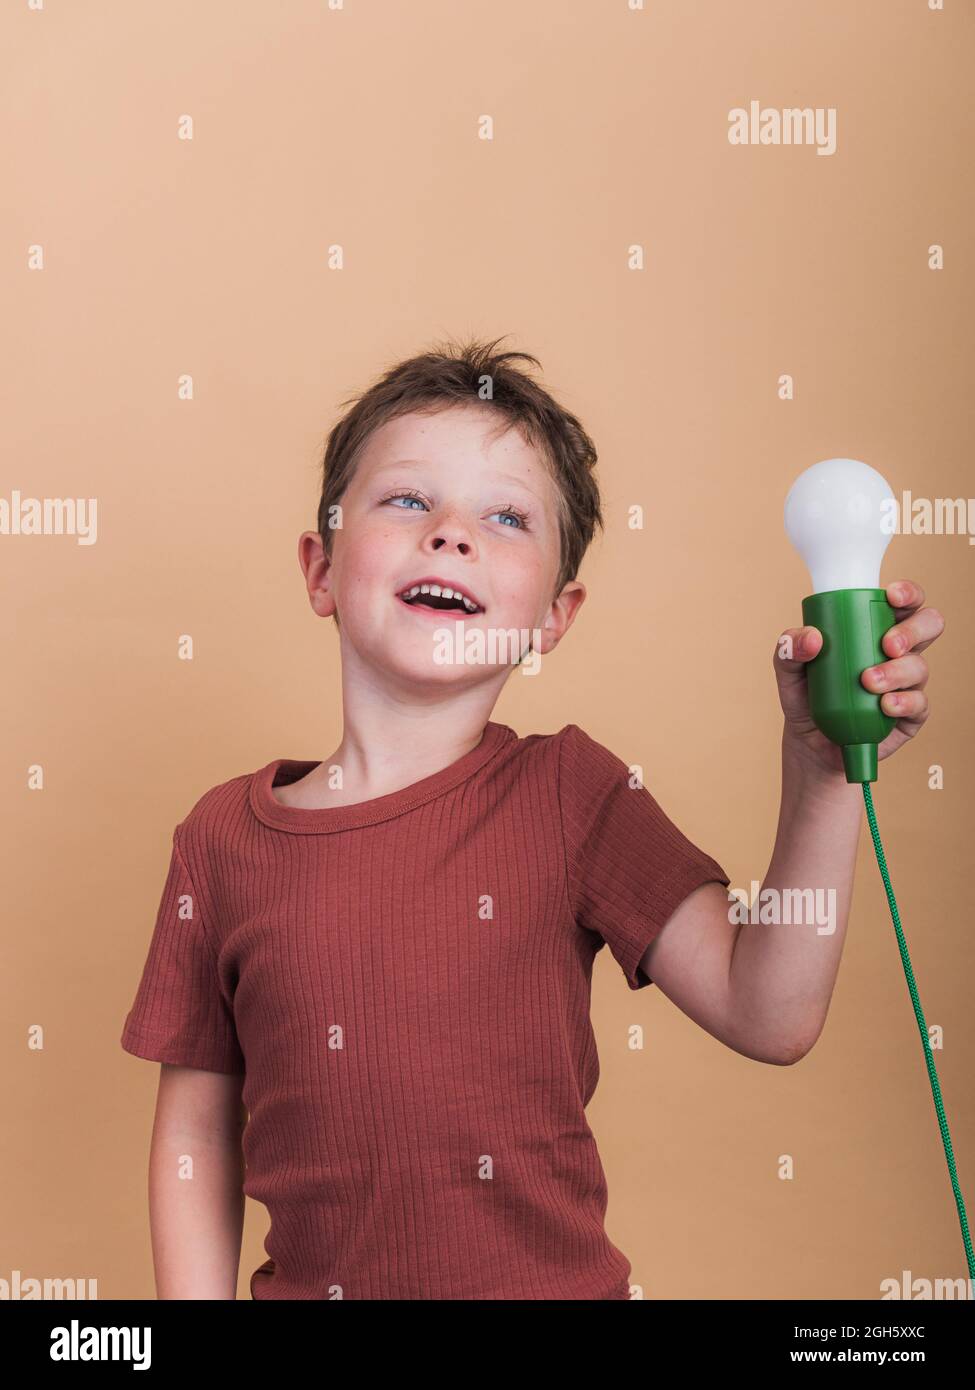 Pondering child in t shirt with plastic light bulb representing idea concept looking up on beige background Stock Photo